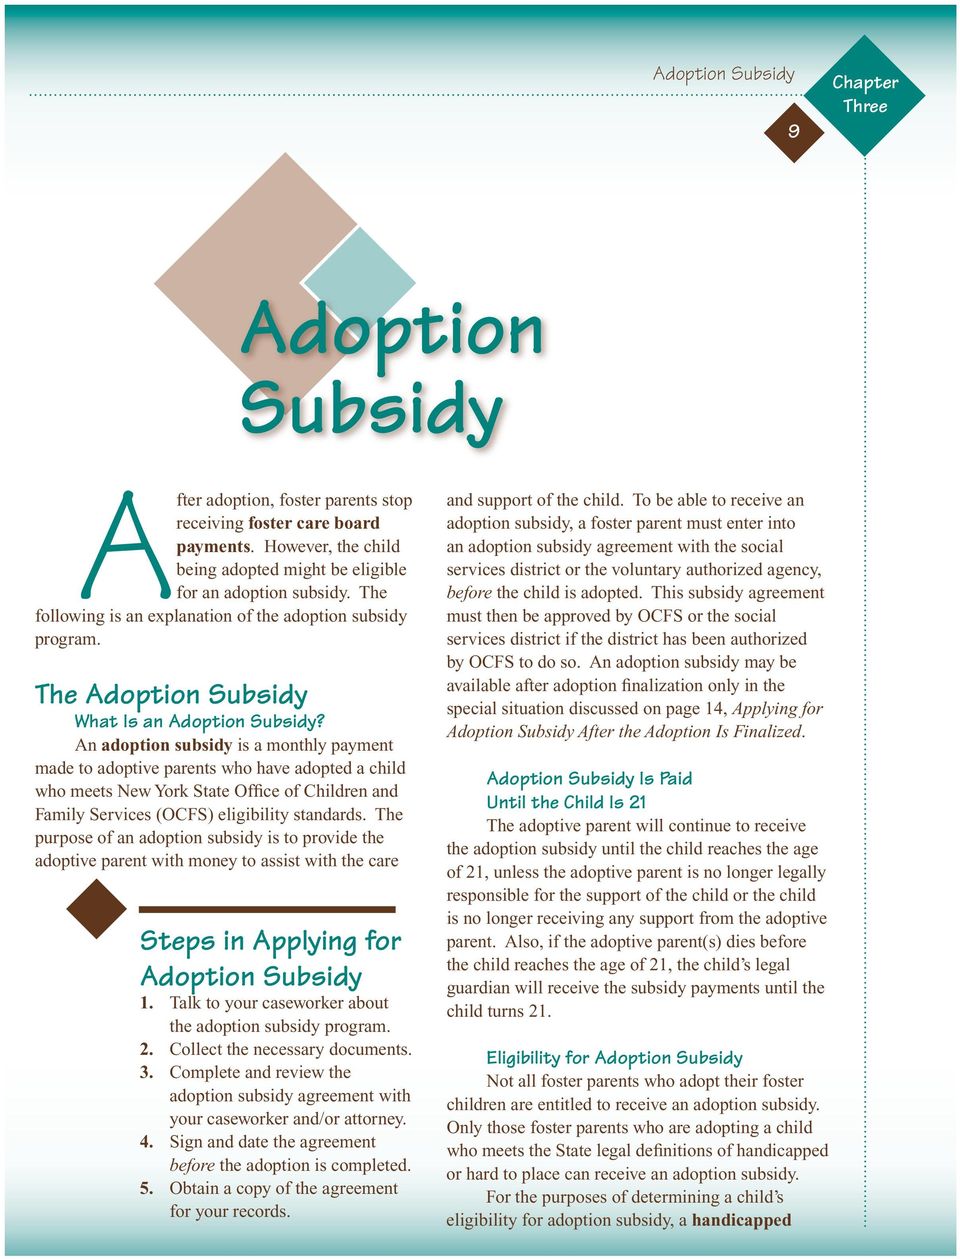 An adoption subsidy is a monthly payment made to adoptive parents who have adopted a child who meets New York State Office of Children and Family Services (OCFS) eligibility standards.